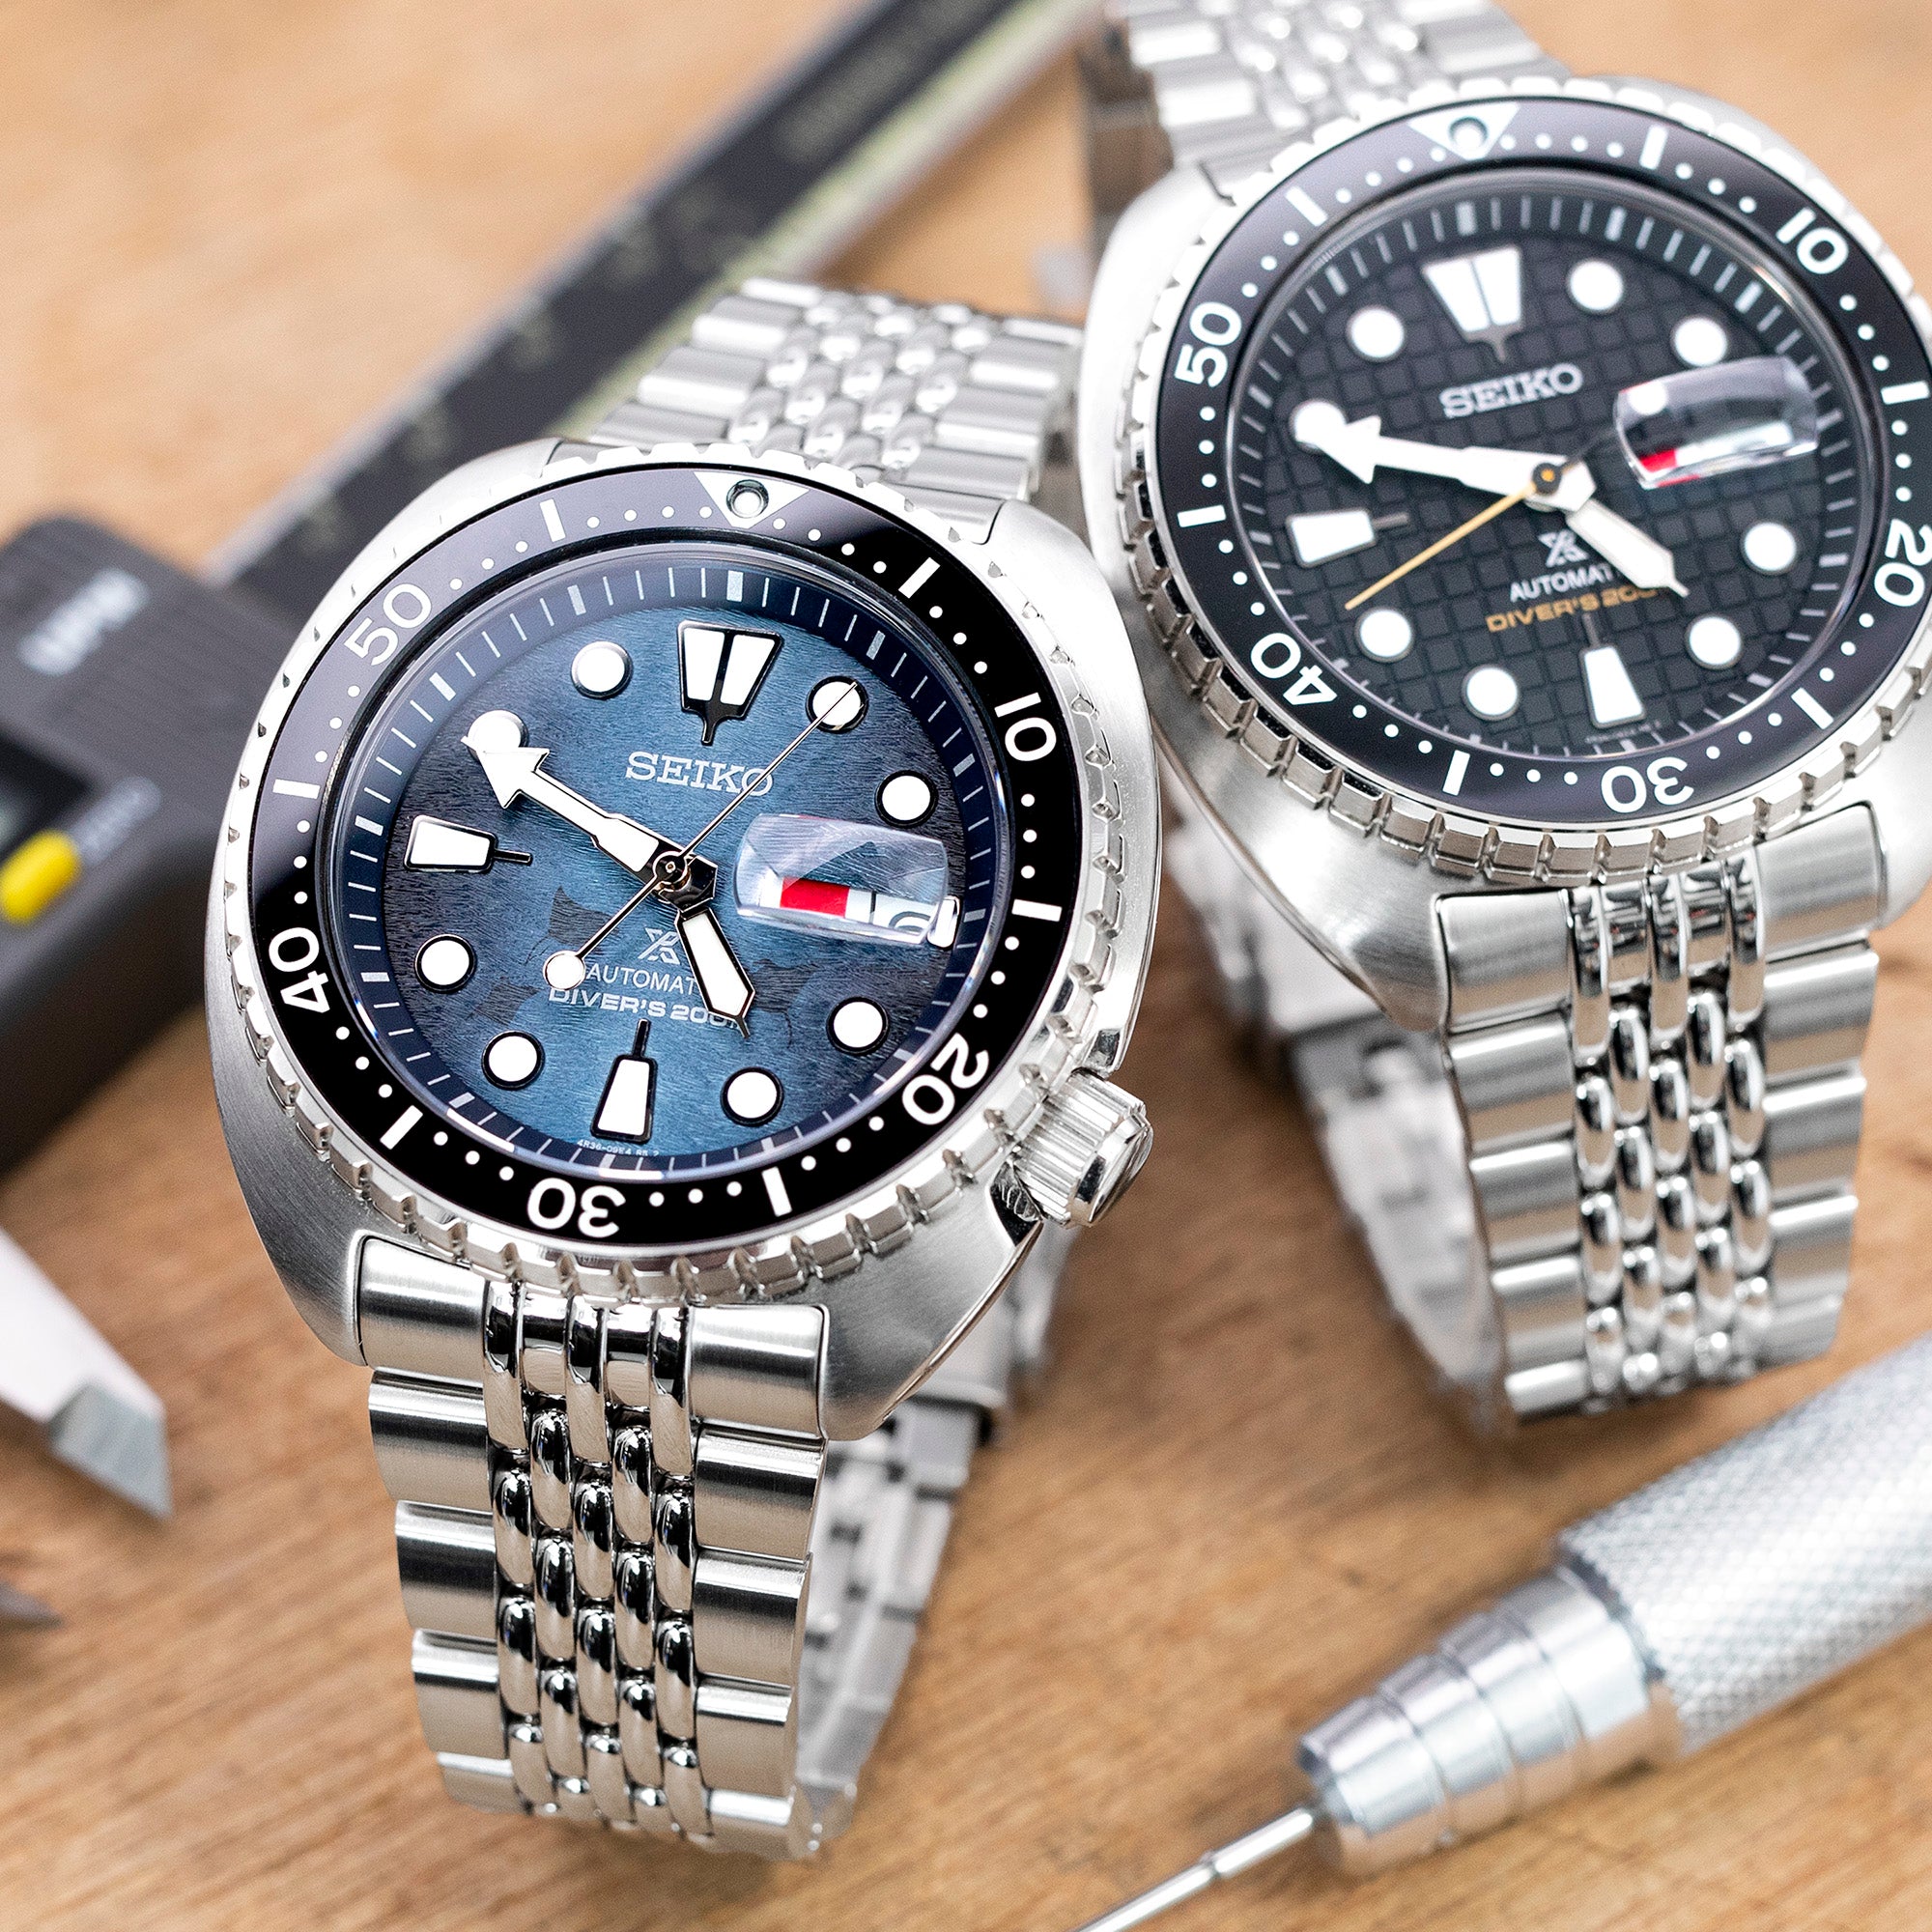 A Seiko Turtle With Elevated Materials & Finishing - SRPE05 & SRPE03 King  Turtle - YouTube